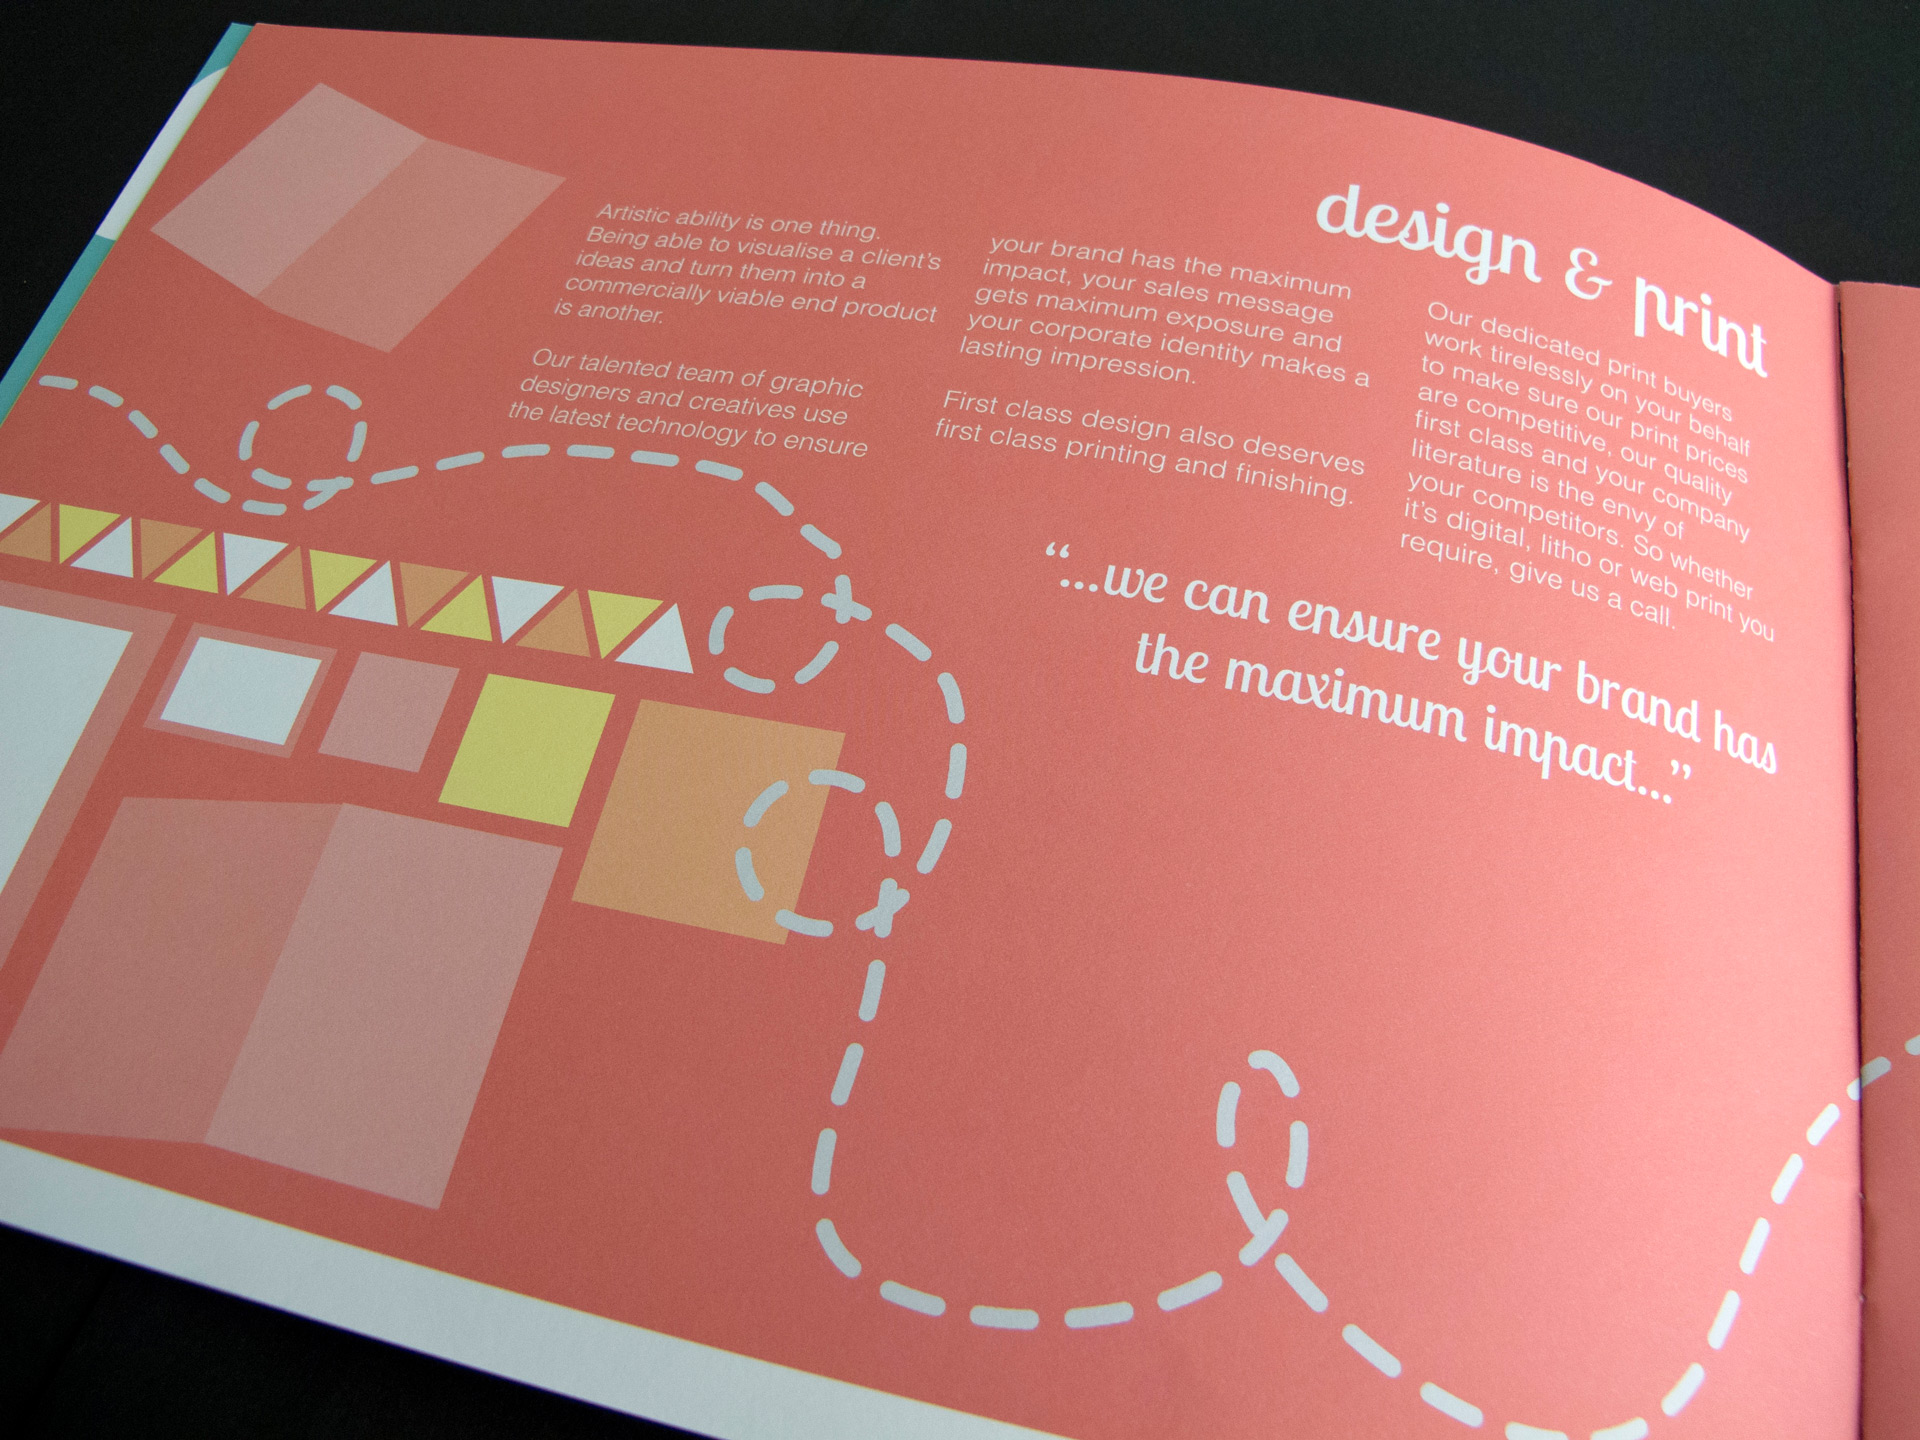 An angled photo of the design and print brochure page. The page is a bright orange colour with white text. The illustrations are in white, peach, and yellow, and depict shape and patterns to represent print design.